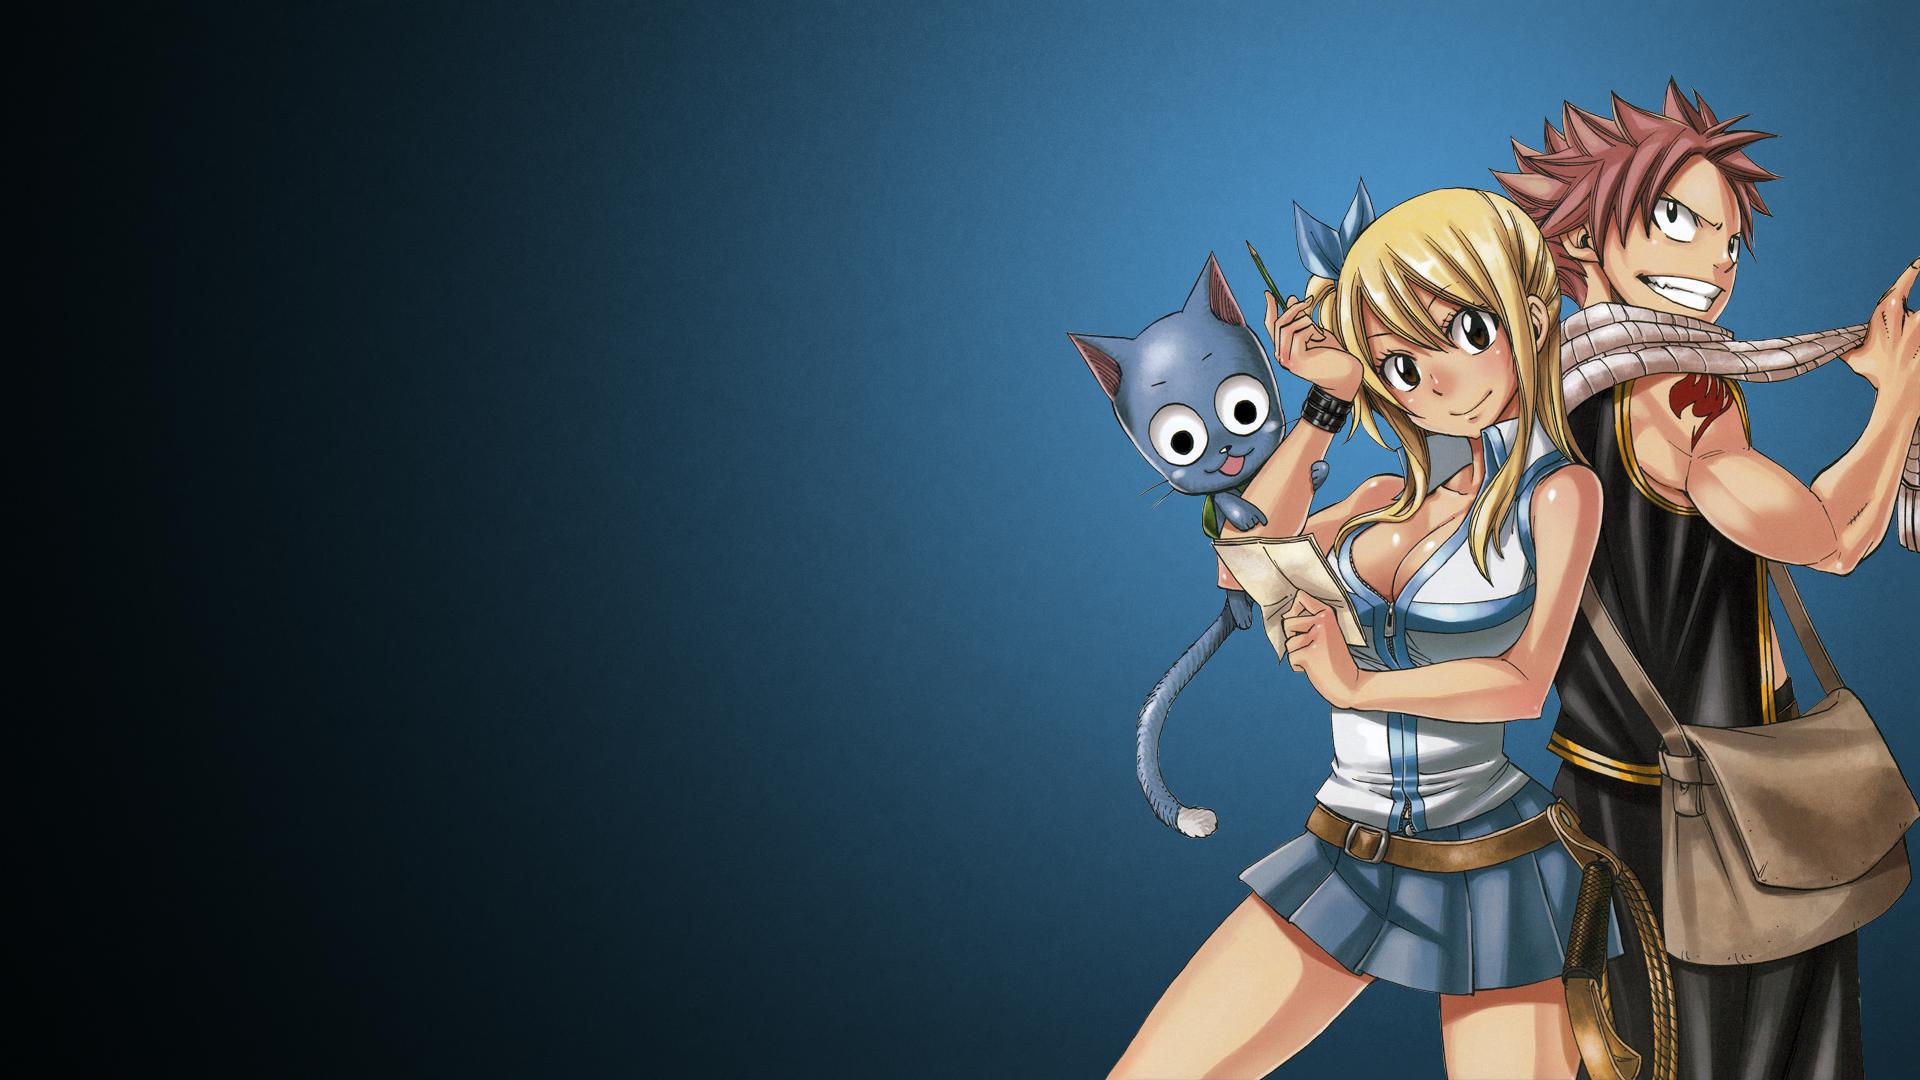 Fairy Tail Anime Wallpapers HD 46 Photos